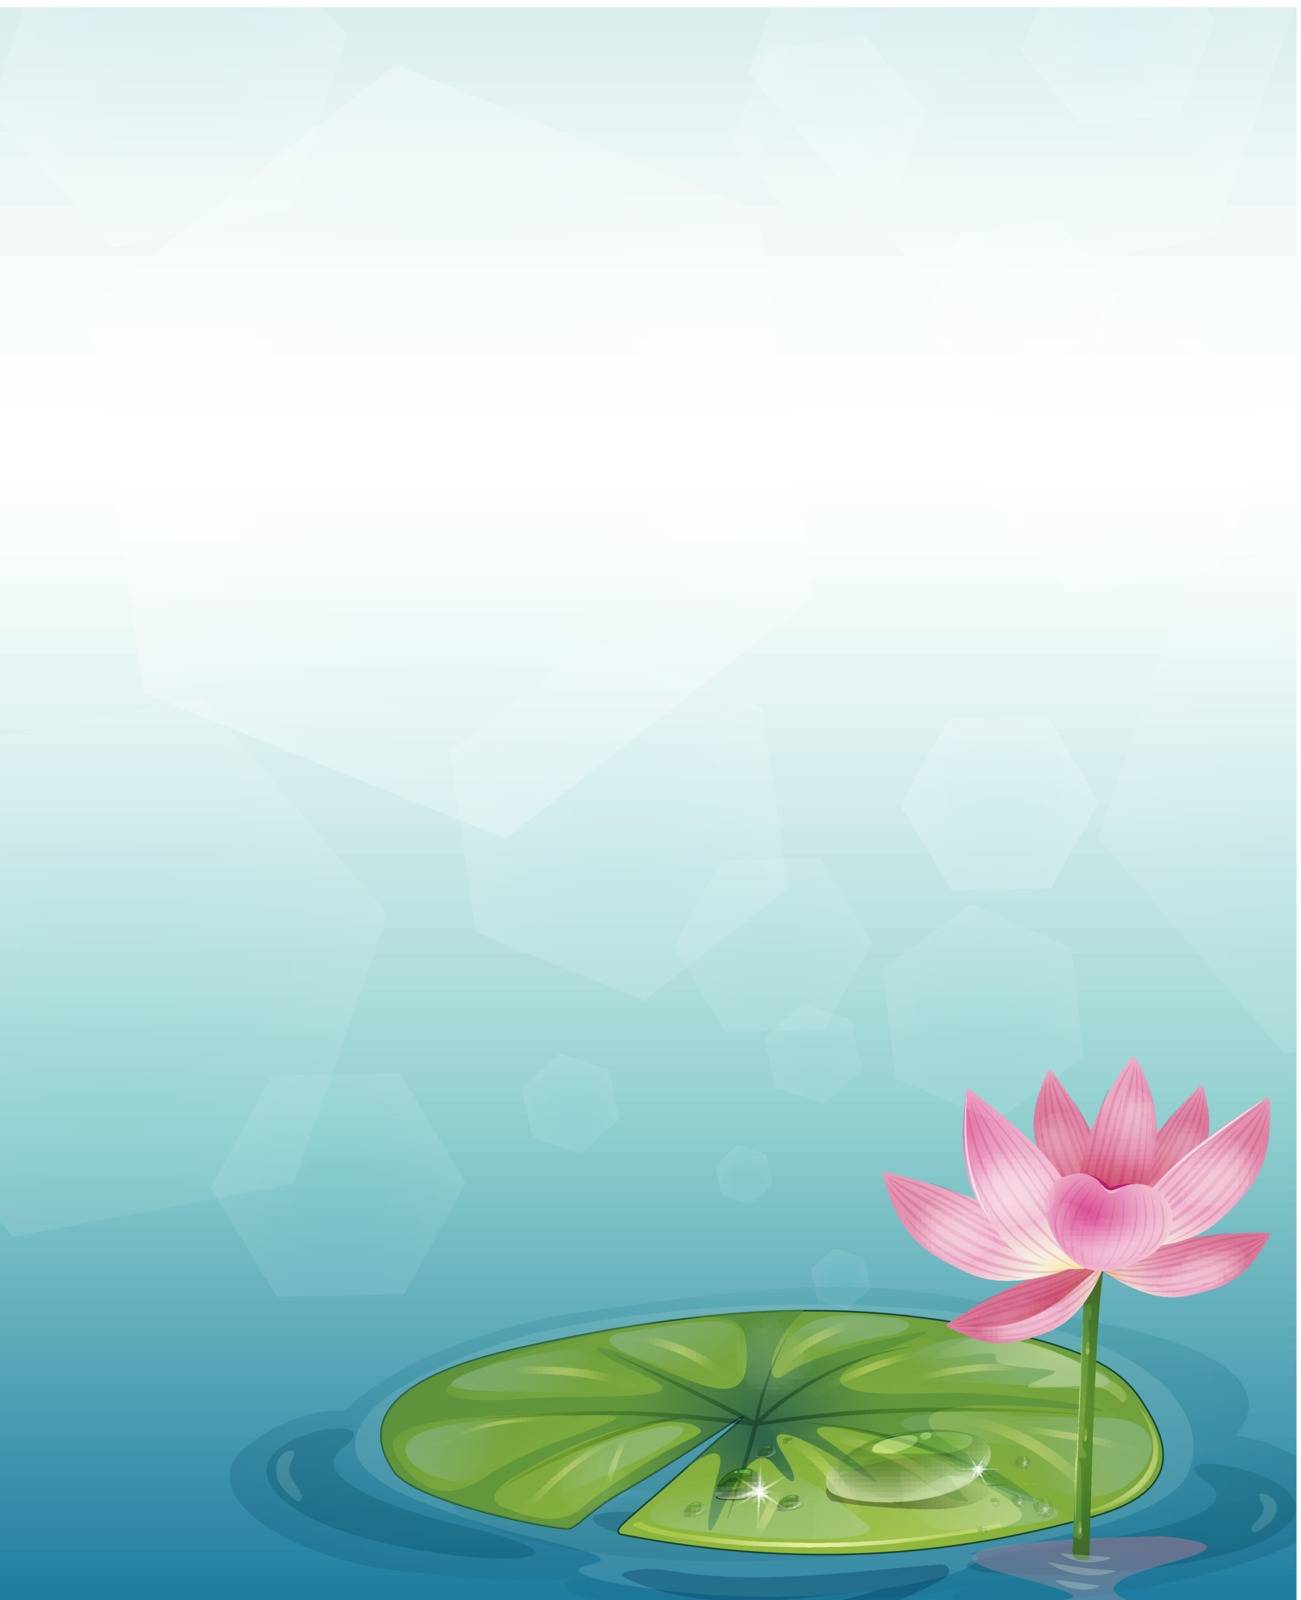 Illustration of a stationery with a waterlily and a pink flower